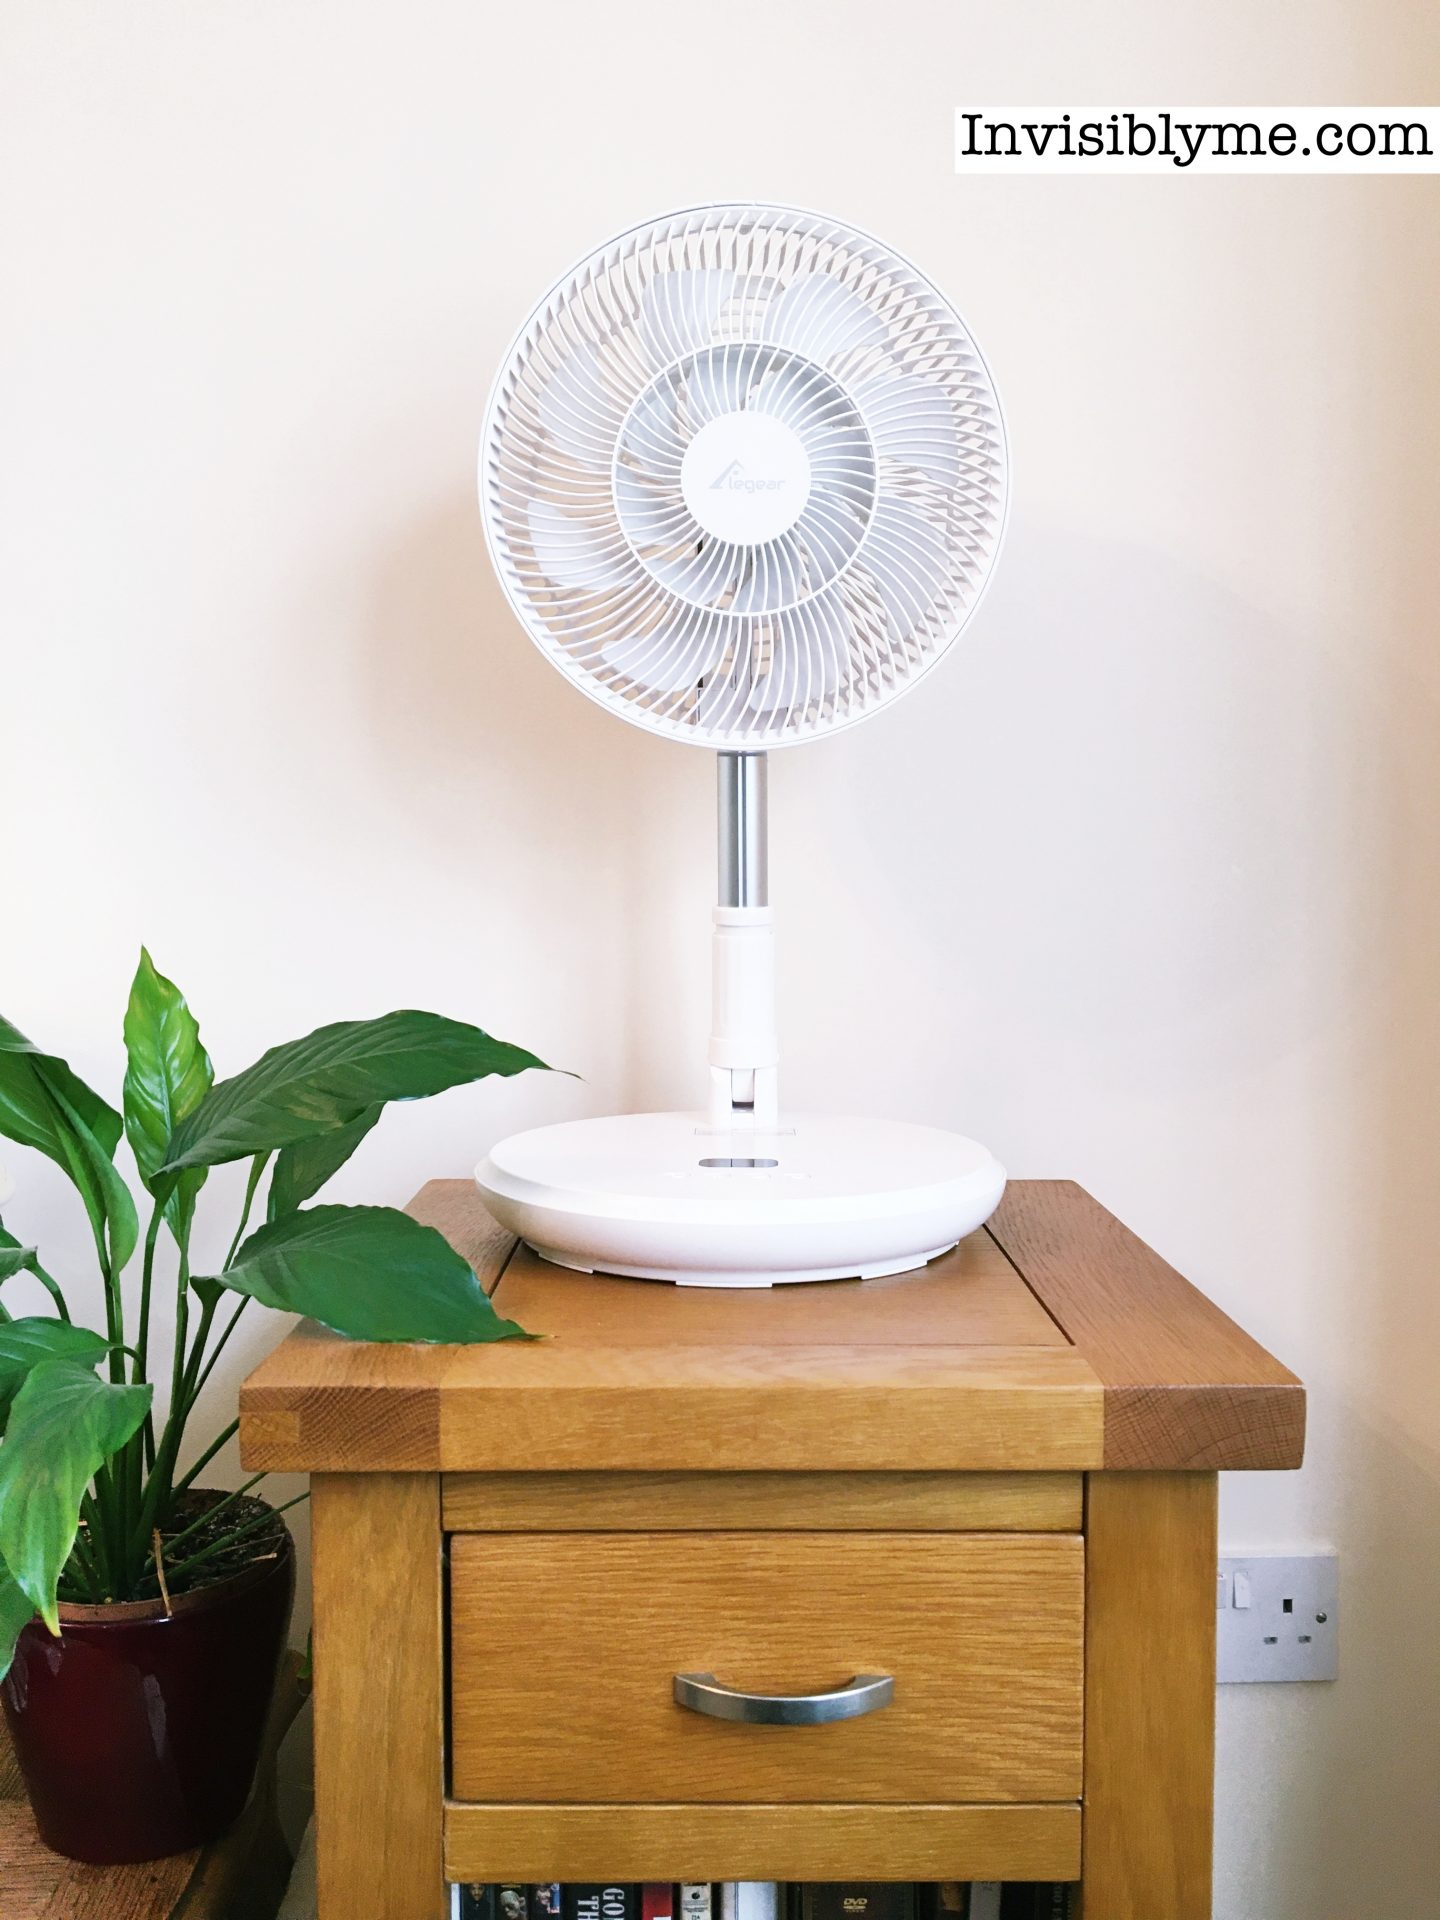 A photo of the Elegear Fan I have reviewed. It's white with a large round base. It's sat on a small table in the living room with a leafy plant to the left of it. The fan is at the shortest height.